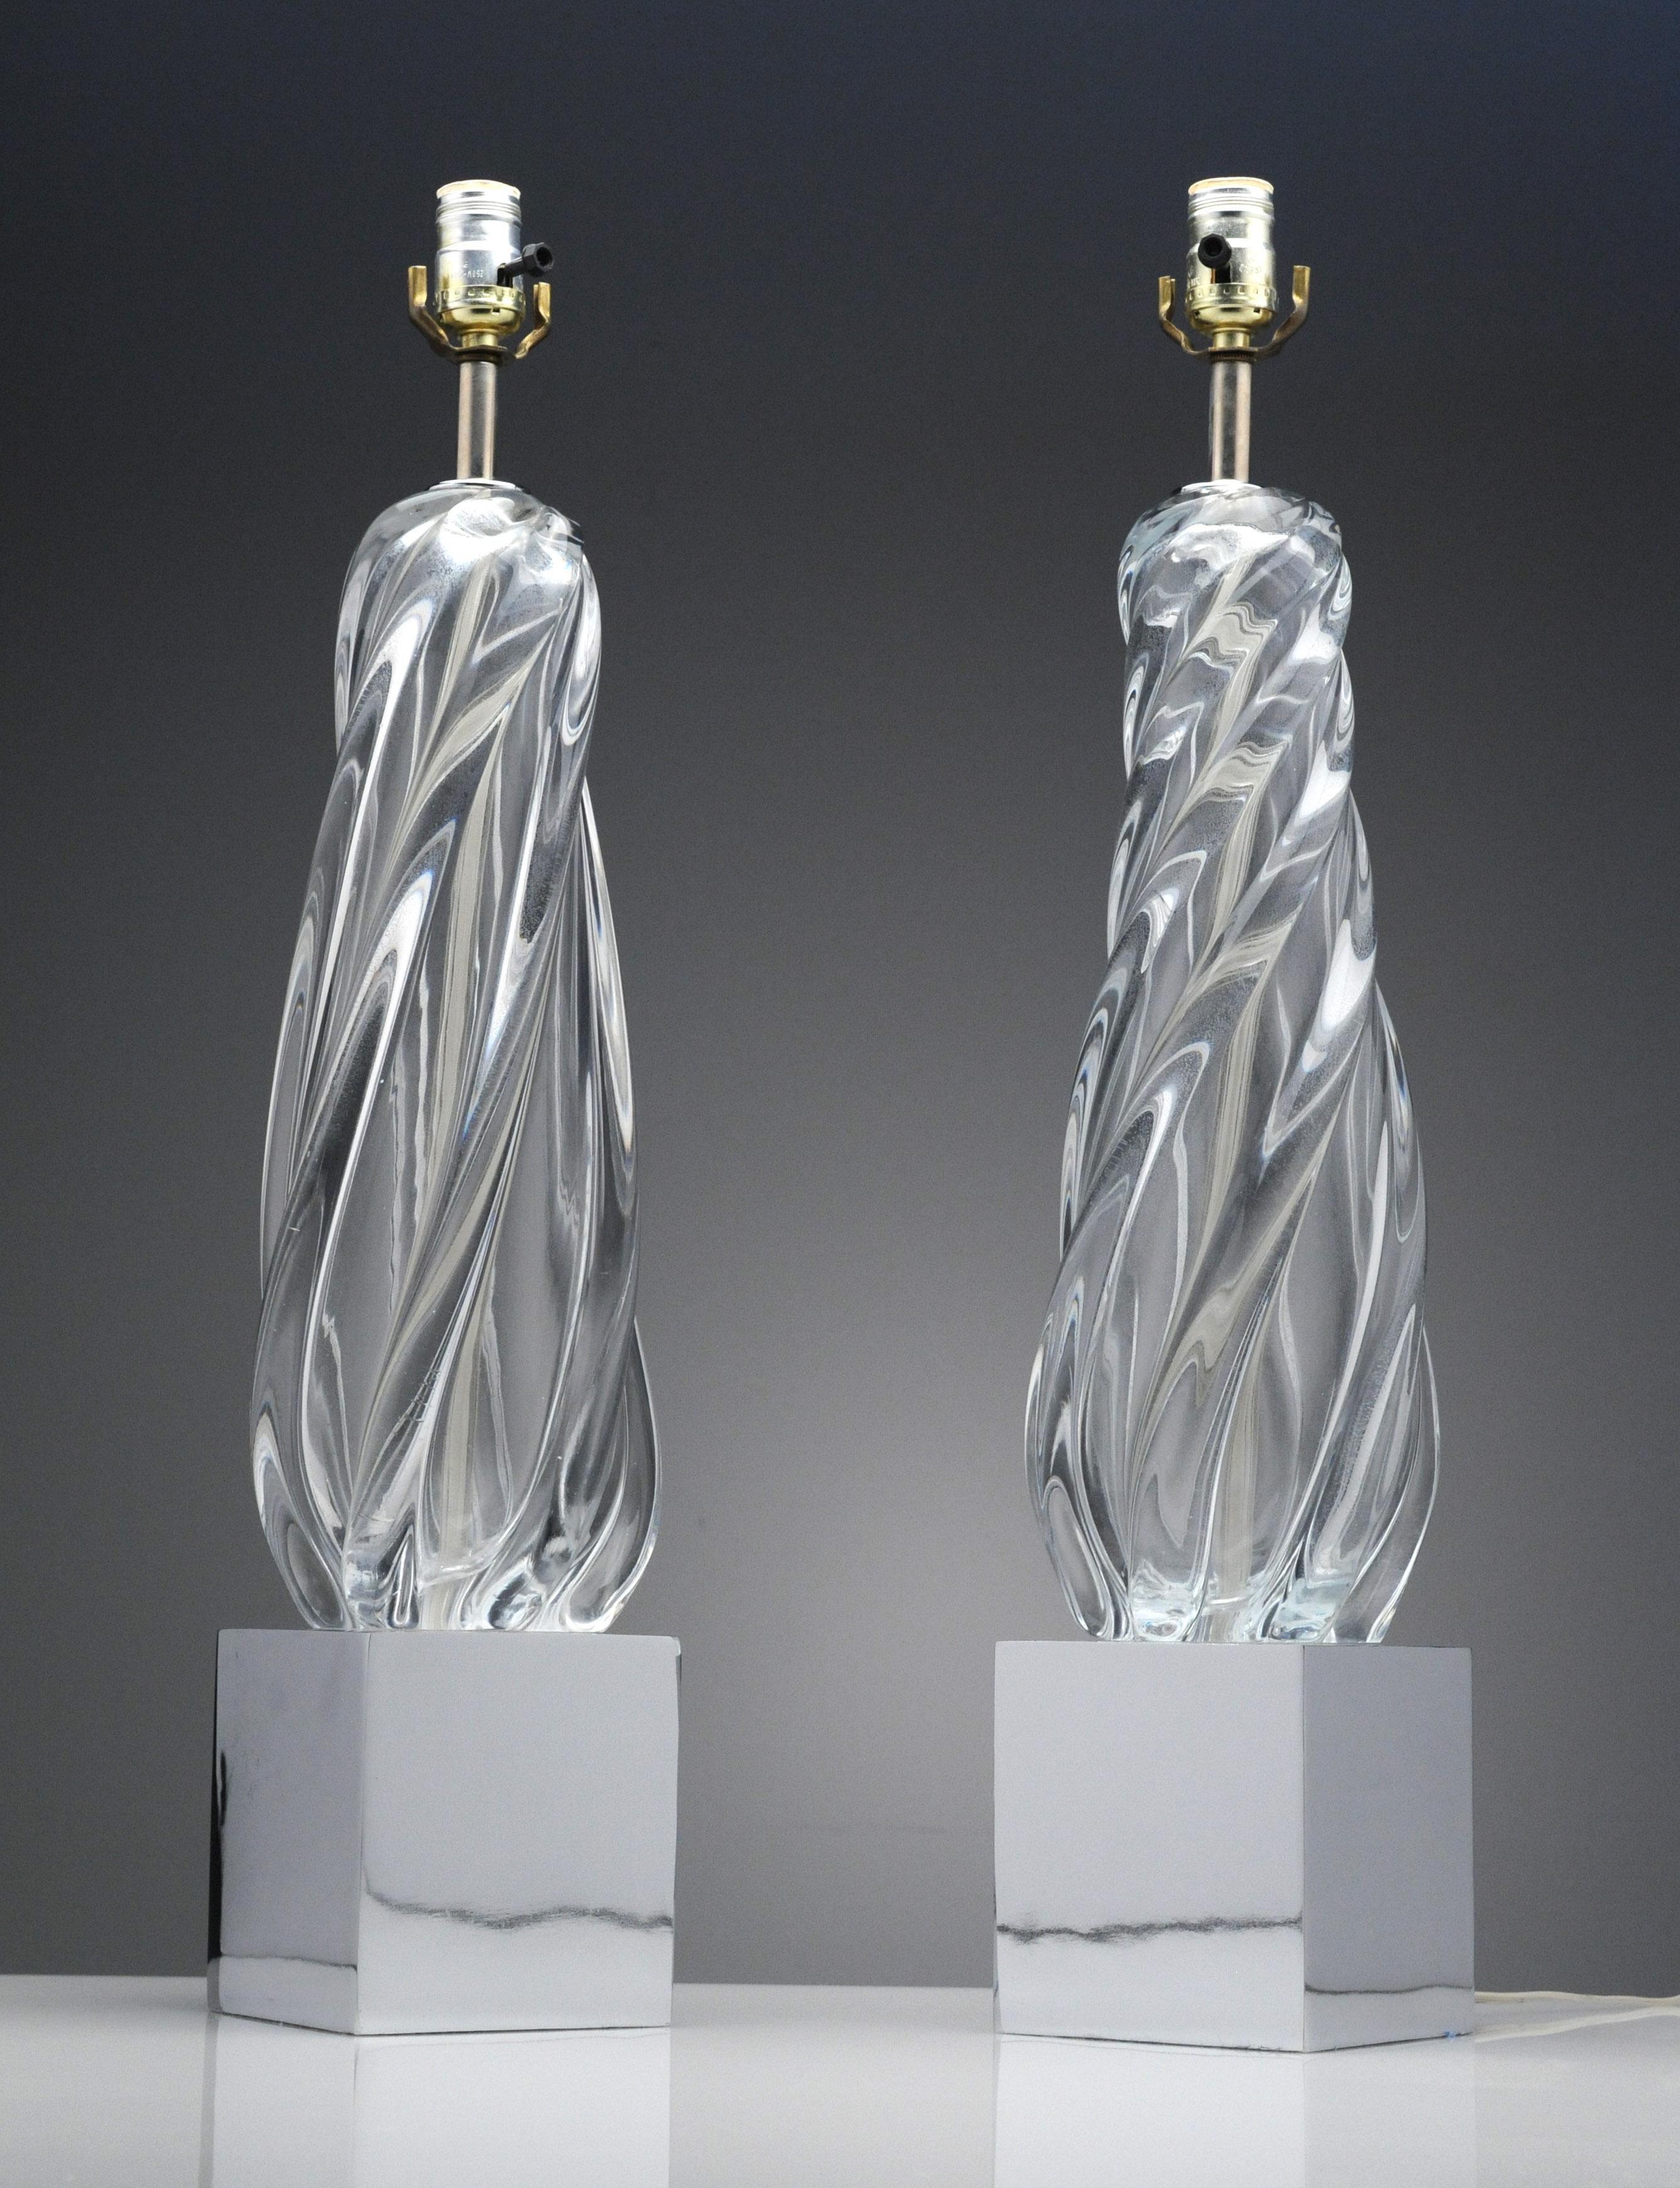 Wonderful pair of vintage clear glass and chrome table lamps. The lamps date back to the 1970s. Lamps measure 27